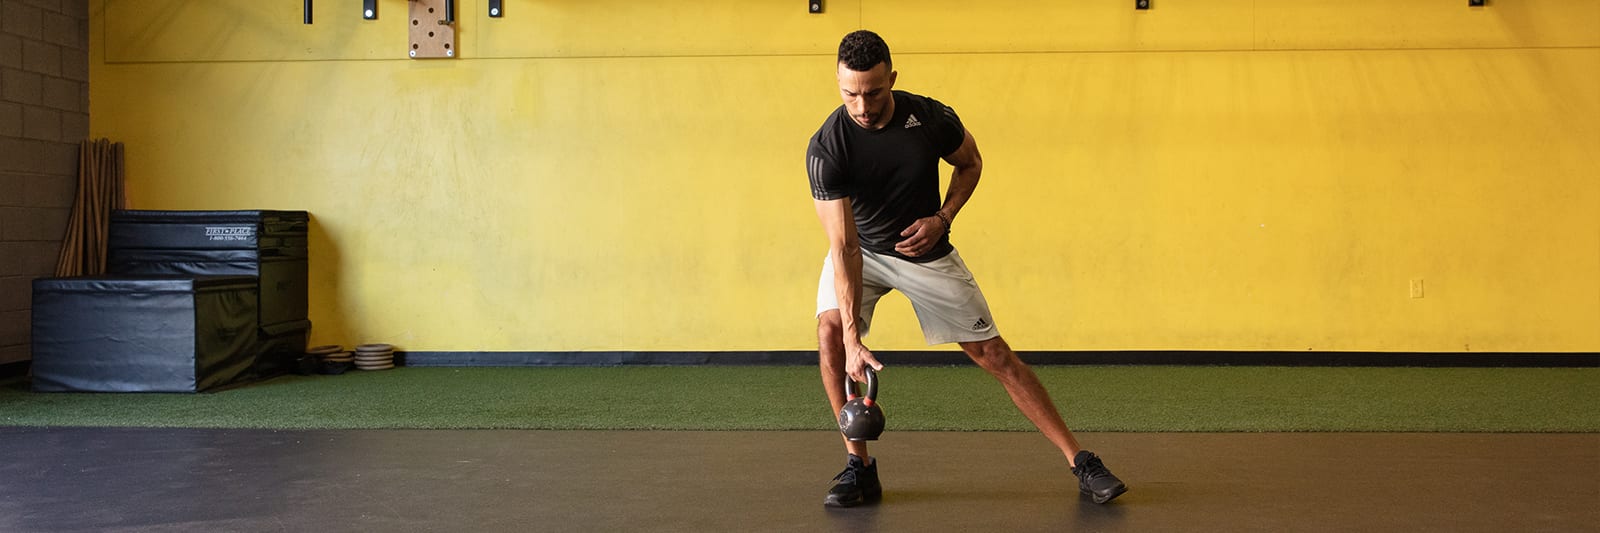 5 Pieces of Golf Fitness Equipment to Strengthen Your Body and Your Swing